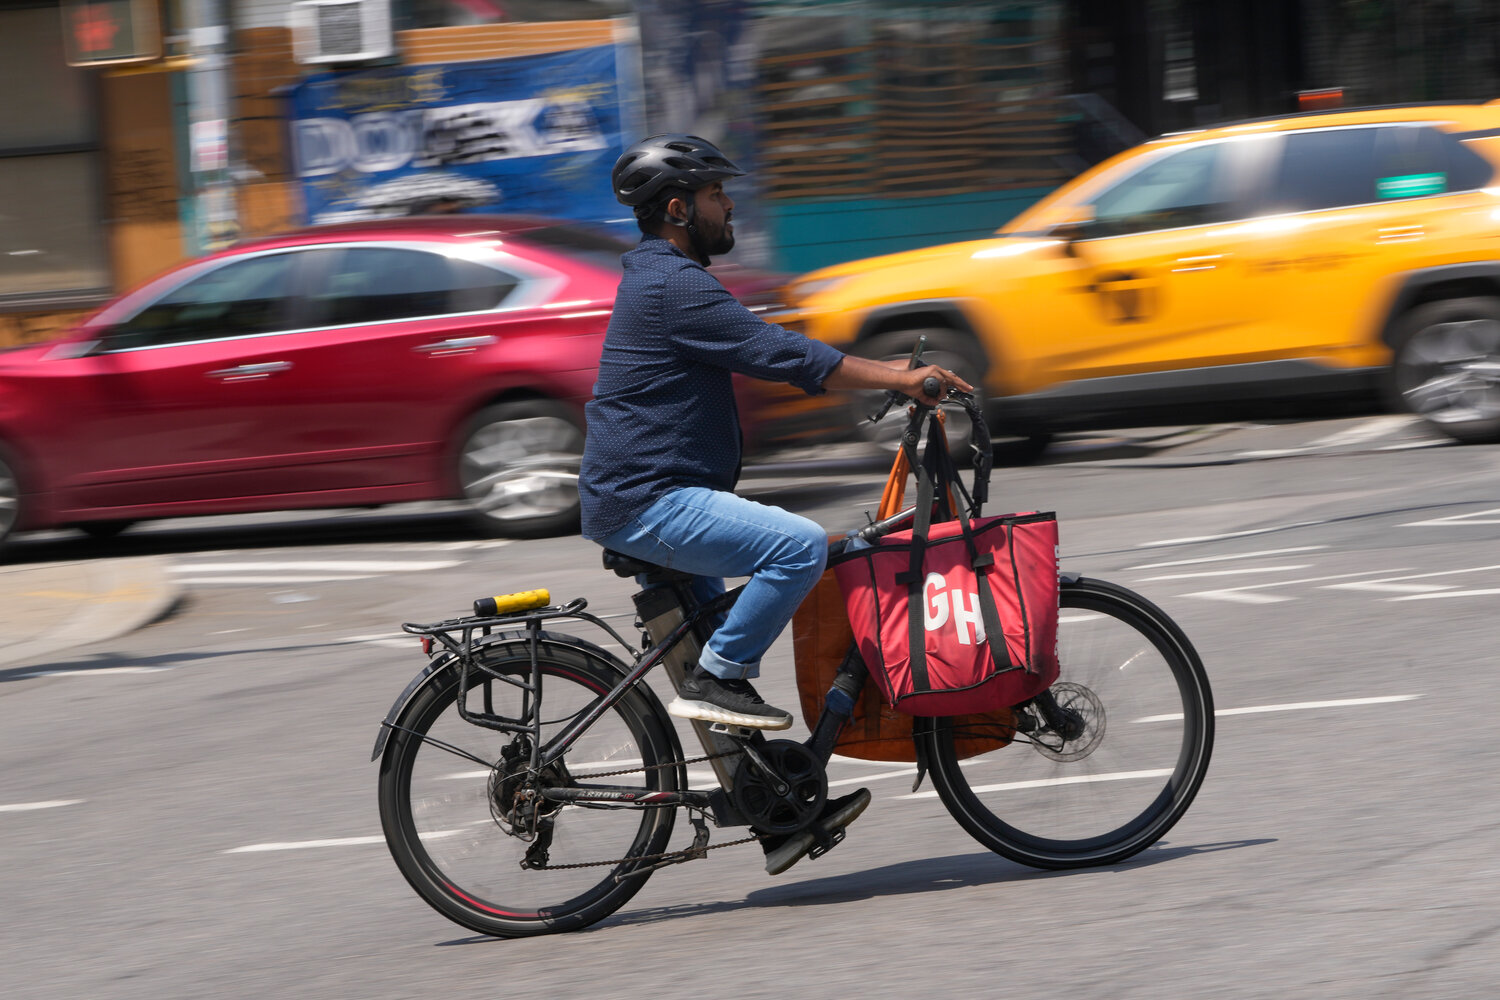 A delivery worker on a motorized bicycle coursed through the city in July. At least 10 states have also considered programs that would make it easier for gig workers to access traditional workplace benefits, such as retirement or paid family leave.